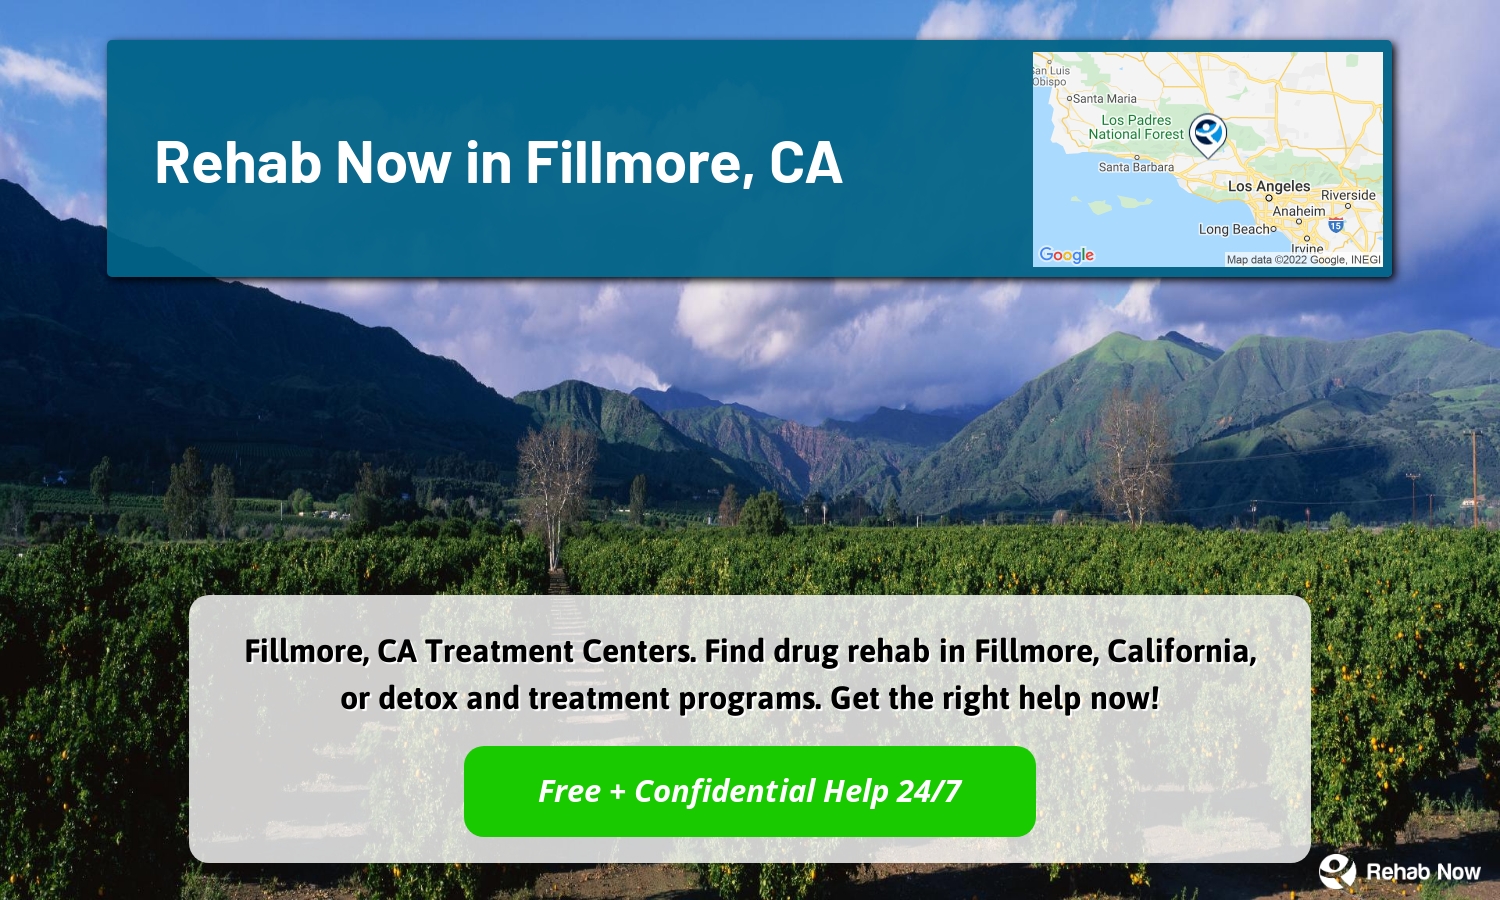 Fillmore, CA Treatment Centers. Find drug rehab in Fillmore, California, or detox and treatment programs. Get the right help now!